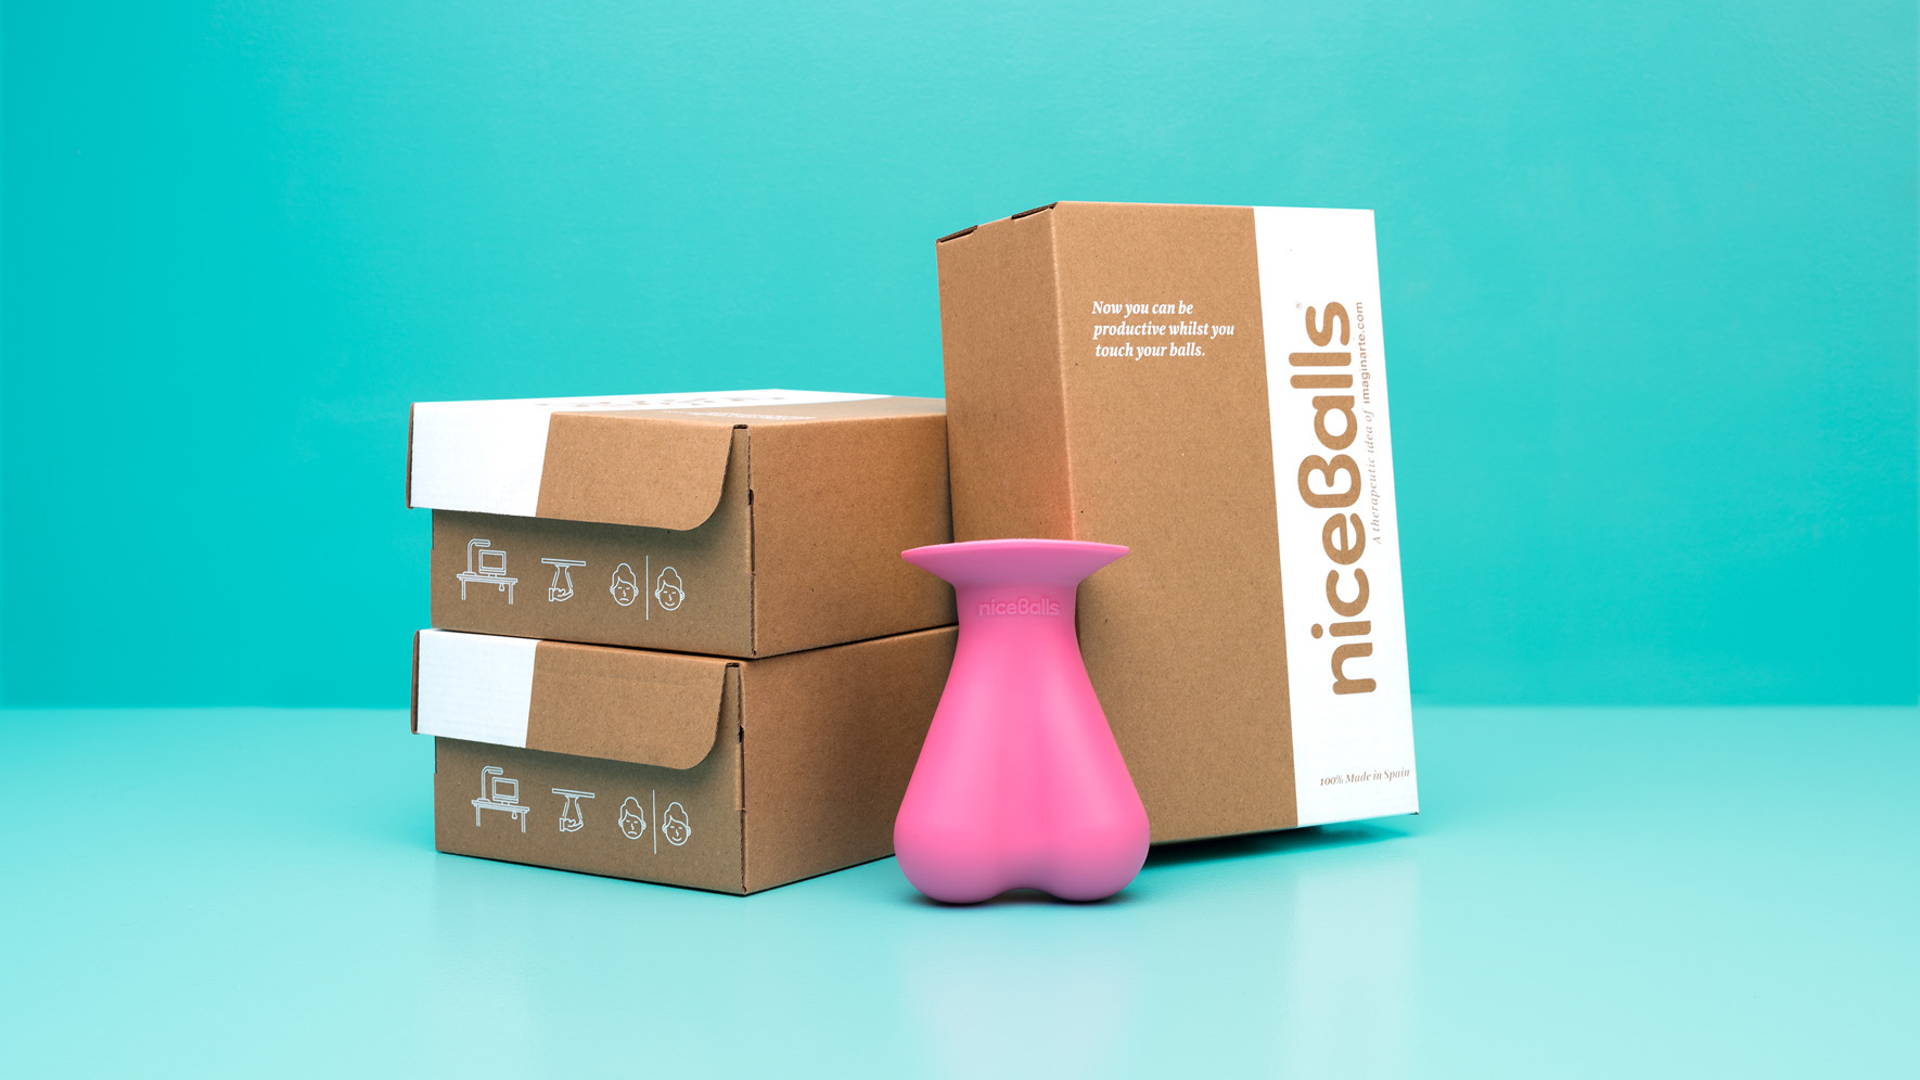 Featured image for This Cheeky Toy Wants To Help You De-Stress At Work